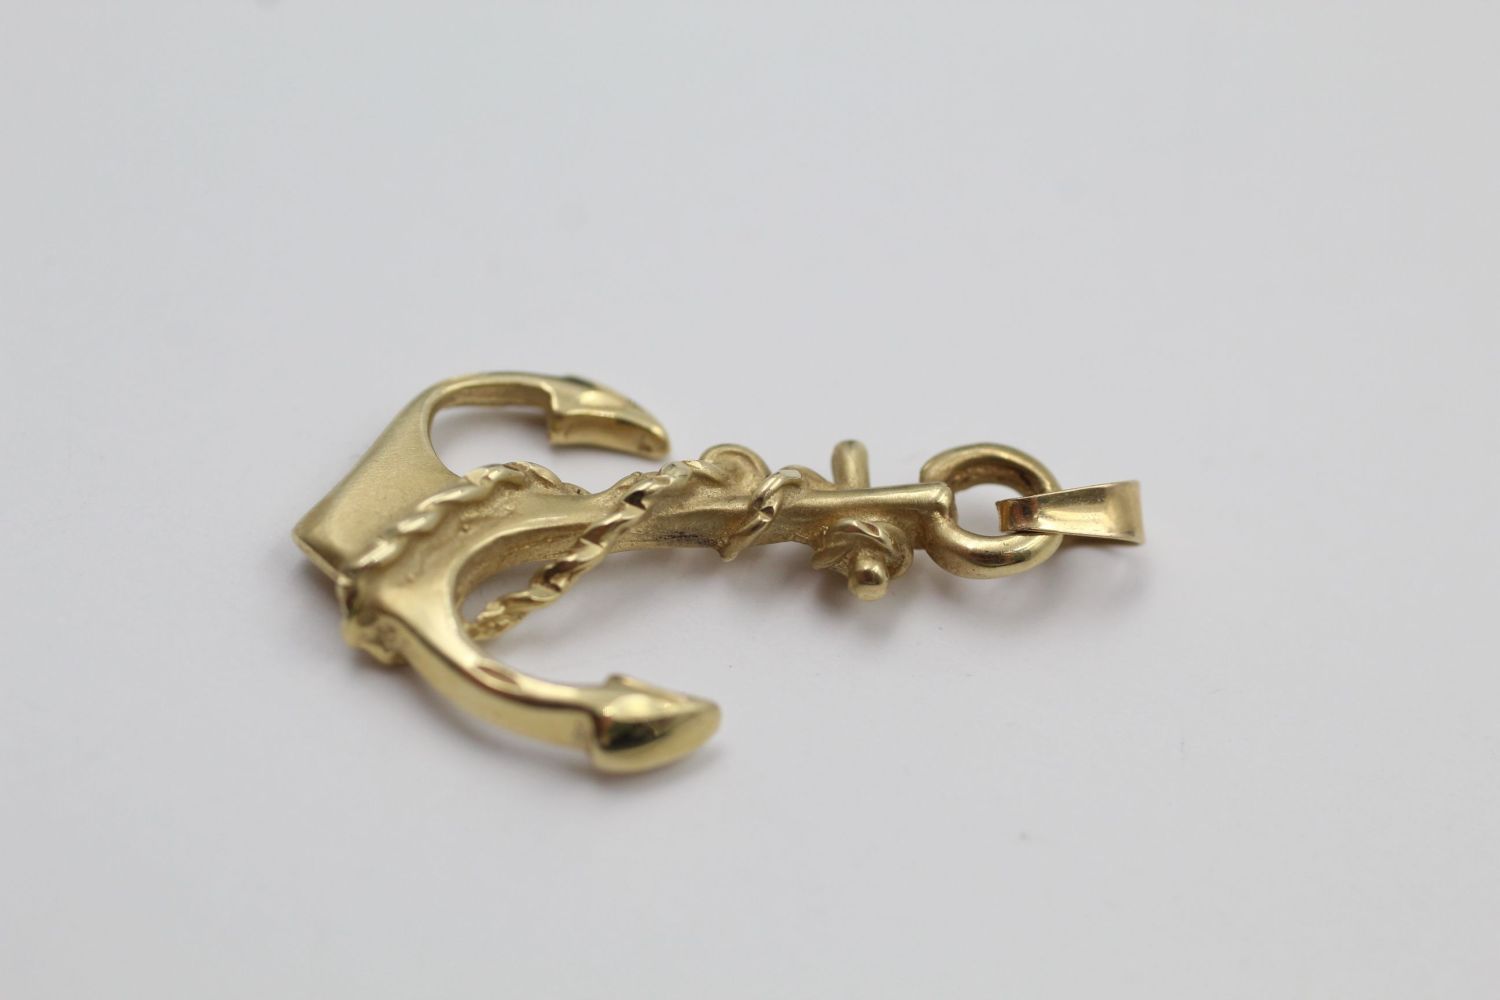 14ct Gold anchor pendant 2 grams gross - Image 2 of 5